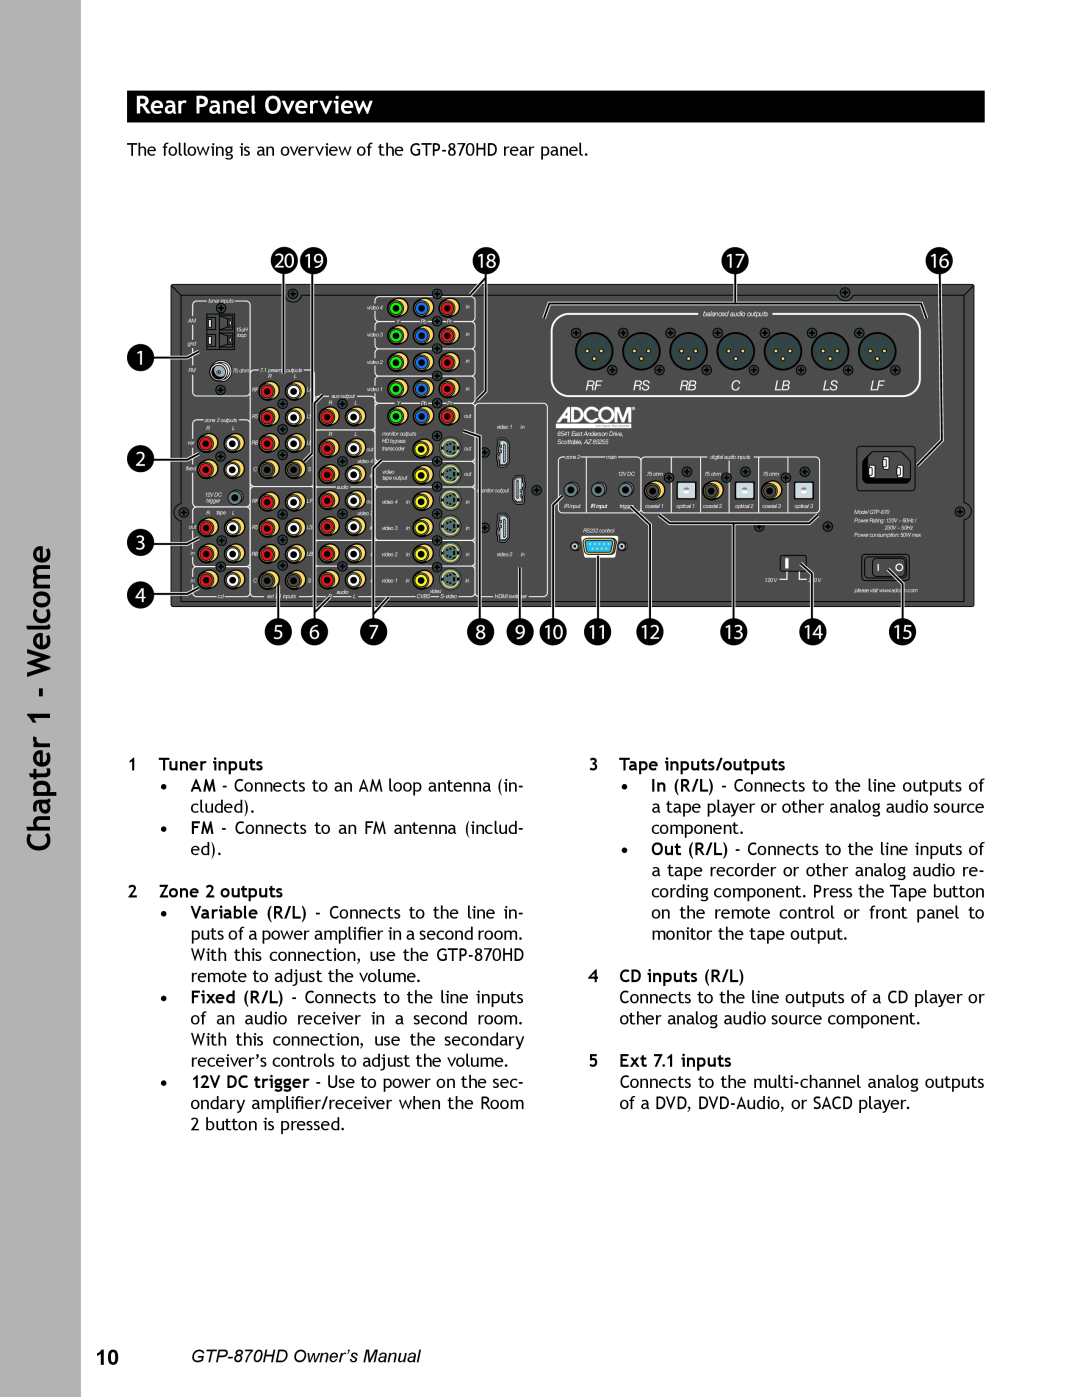 Adcom GTP-870HD user manual Welcome, Chapter, Rear Panel Overview, 1Tuner inputs, 2Zone 2 outputs, 3Tape inputs/outputs 